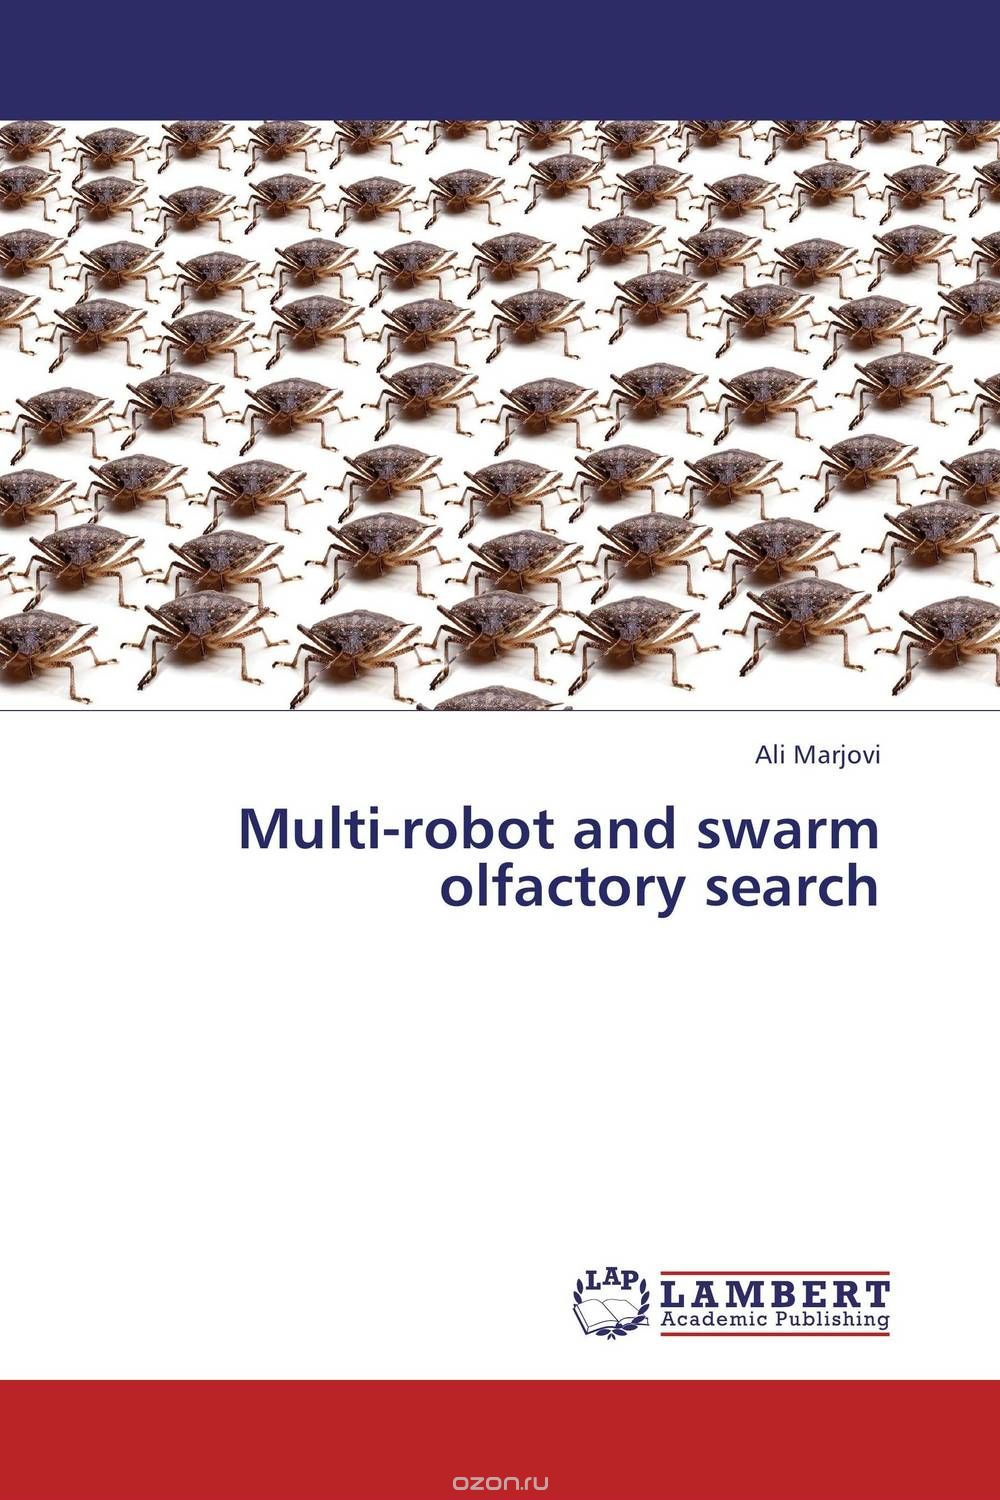 Multi-robot and swarm olfactory search